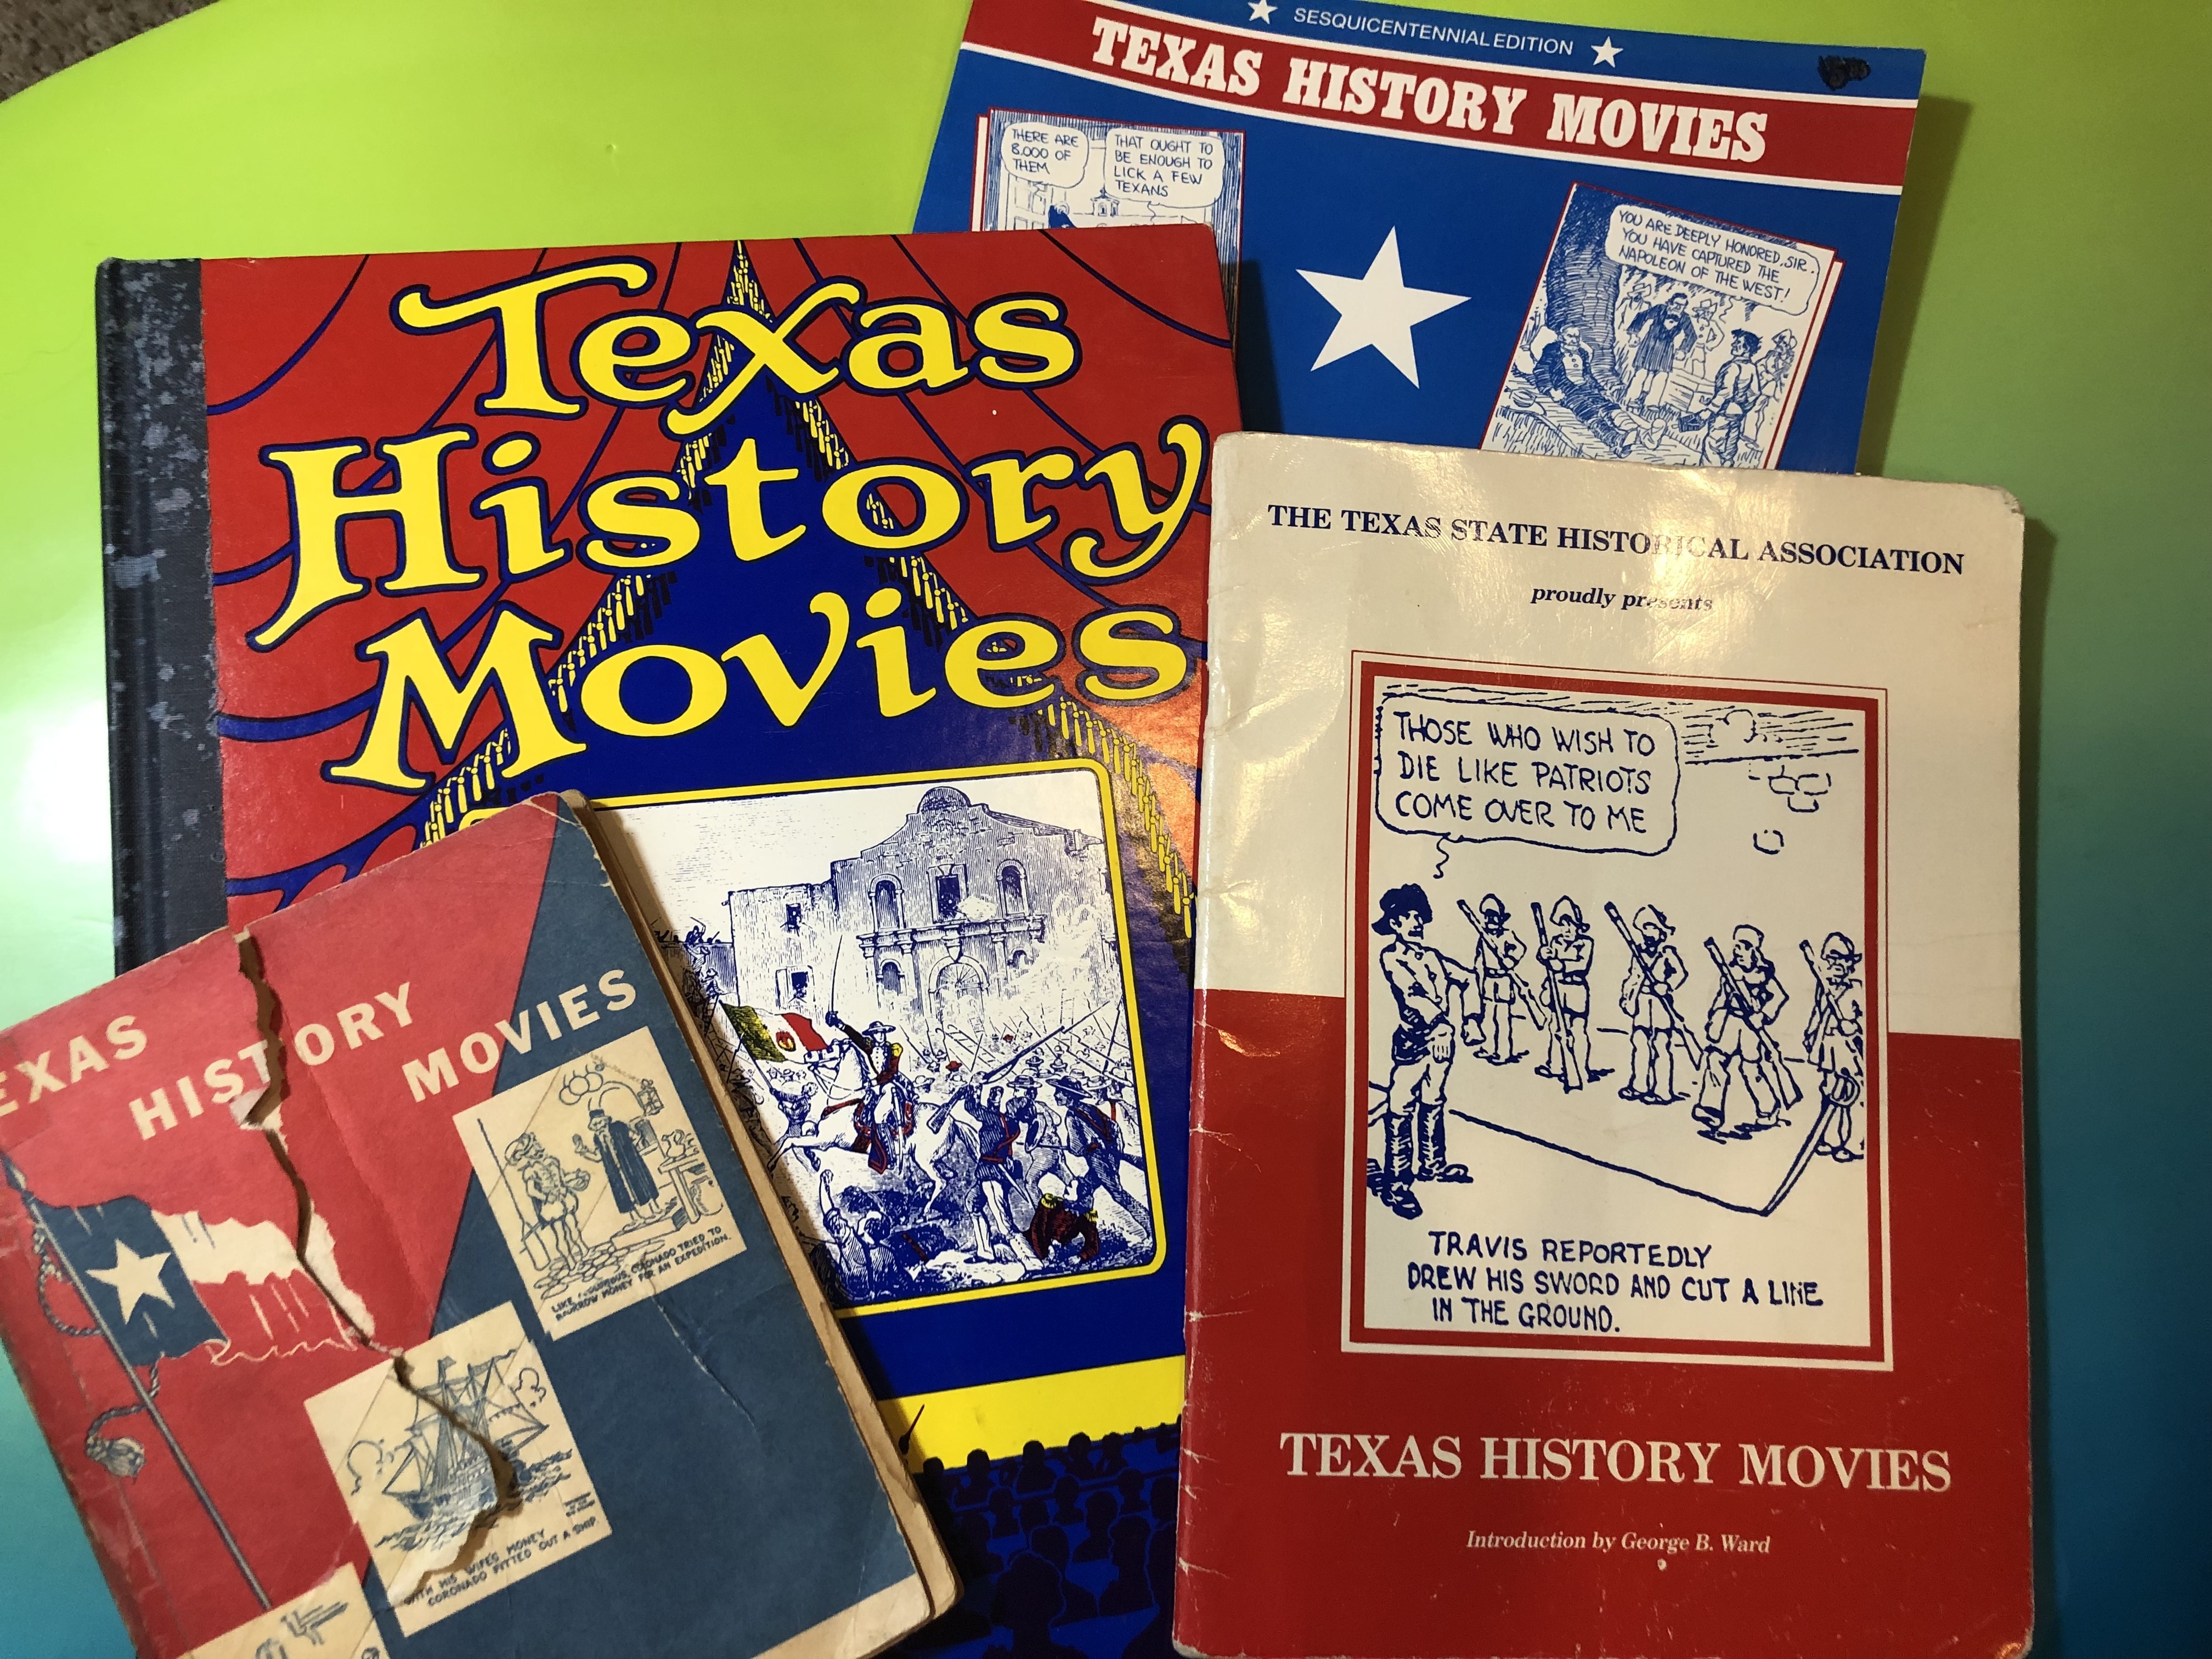 For decades, a comic book showing Texas history in the most racist ways was  given to Texas students